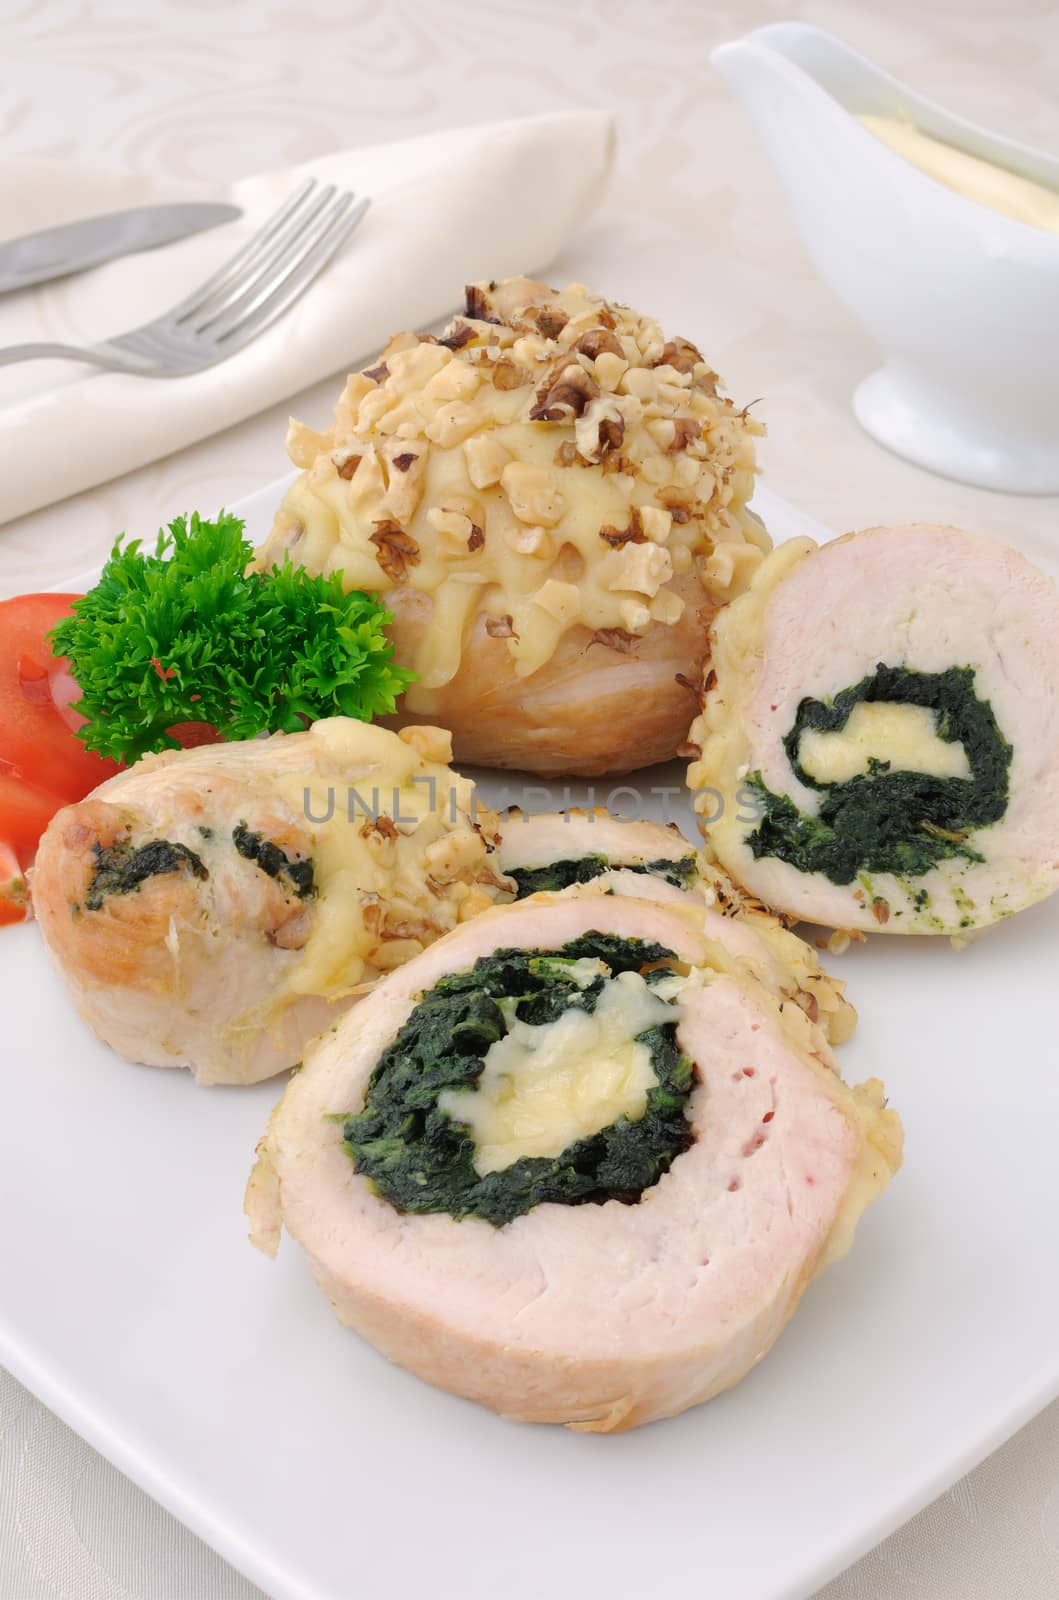 Chicken roulade stuffed with spinach and cheese by Apolonia